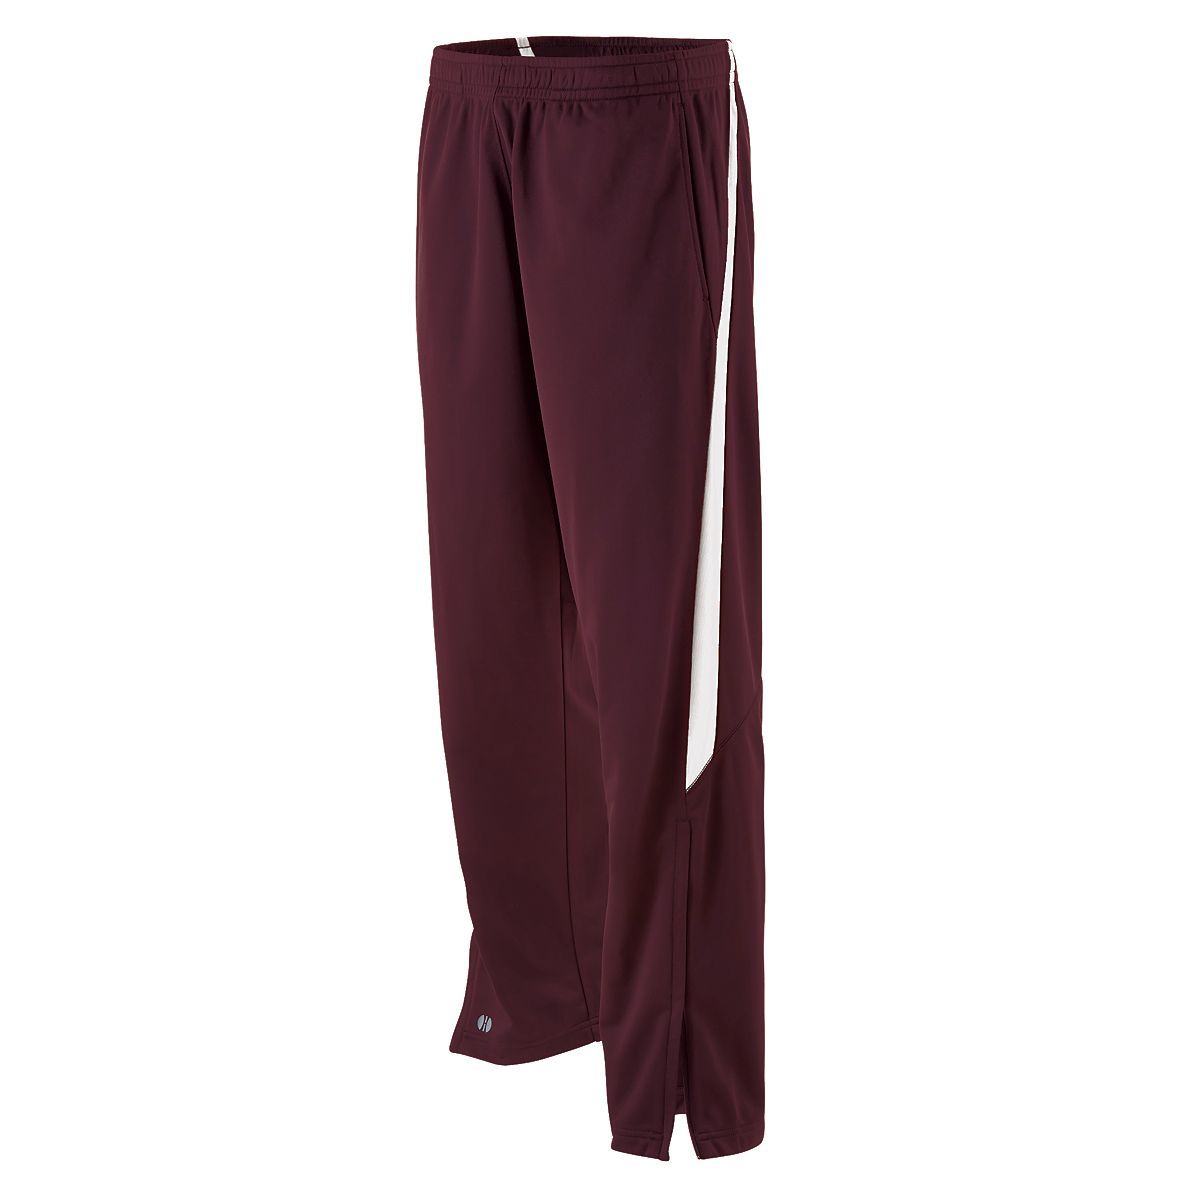 Holloway Youth Determination Pant in Maroon/White  -Part of the Youth, Youth-Pants, Pants, Holloway product lines at KanaleyCreations.com